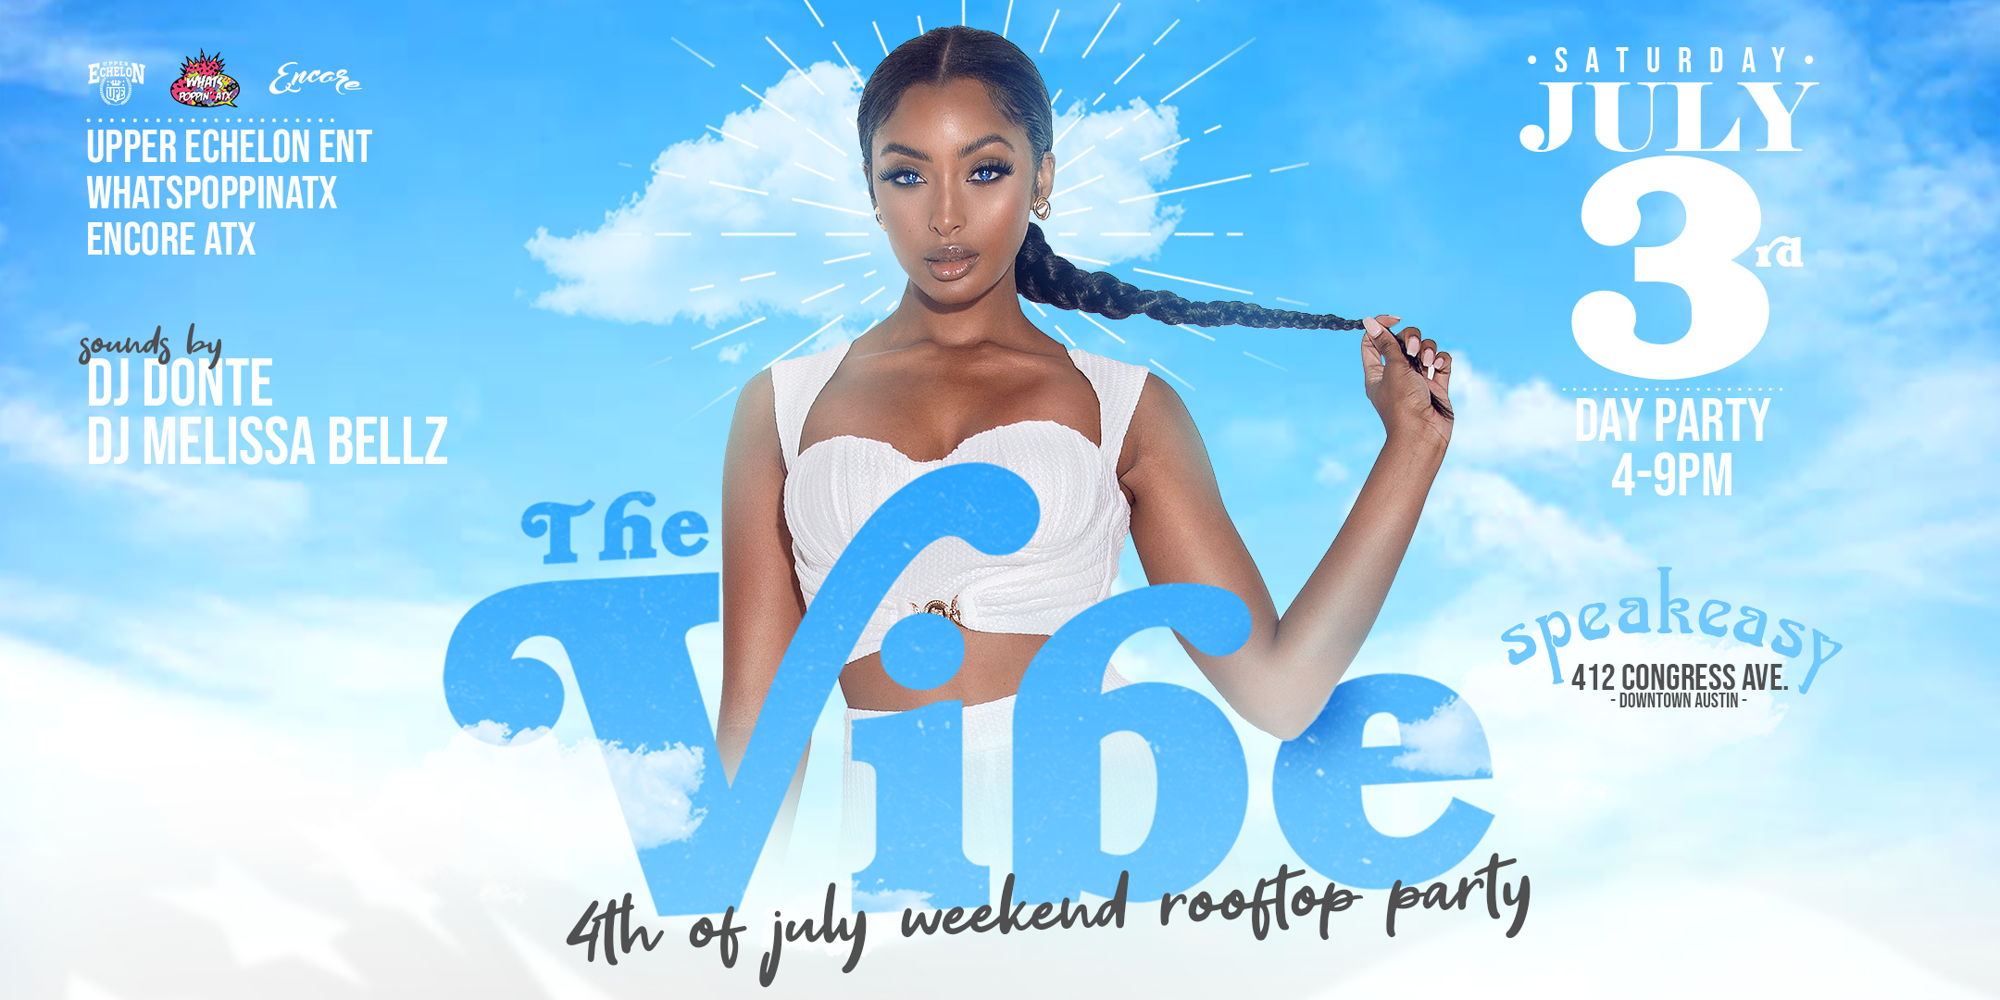 The Vibes Day Party promotional image